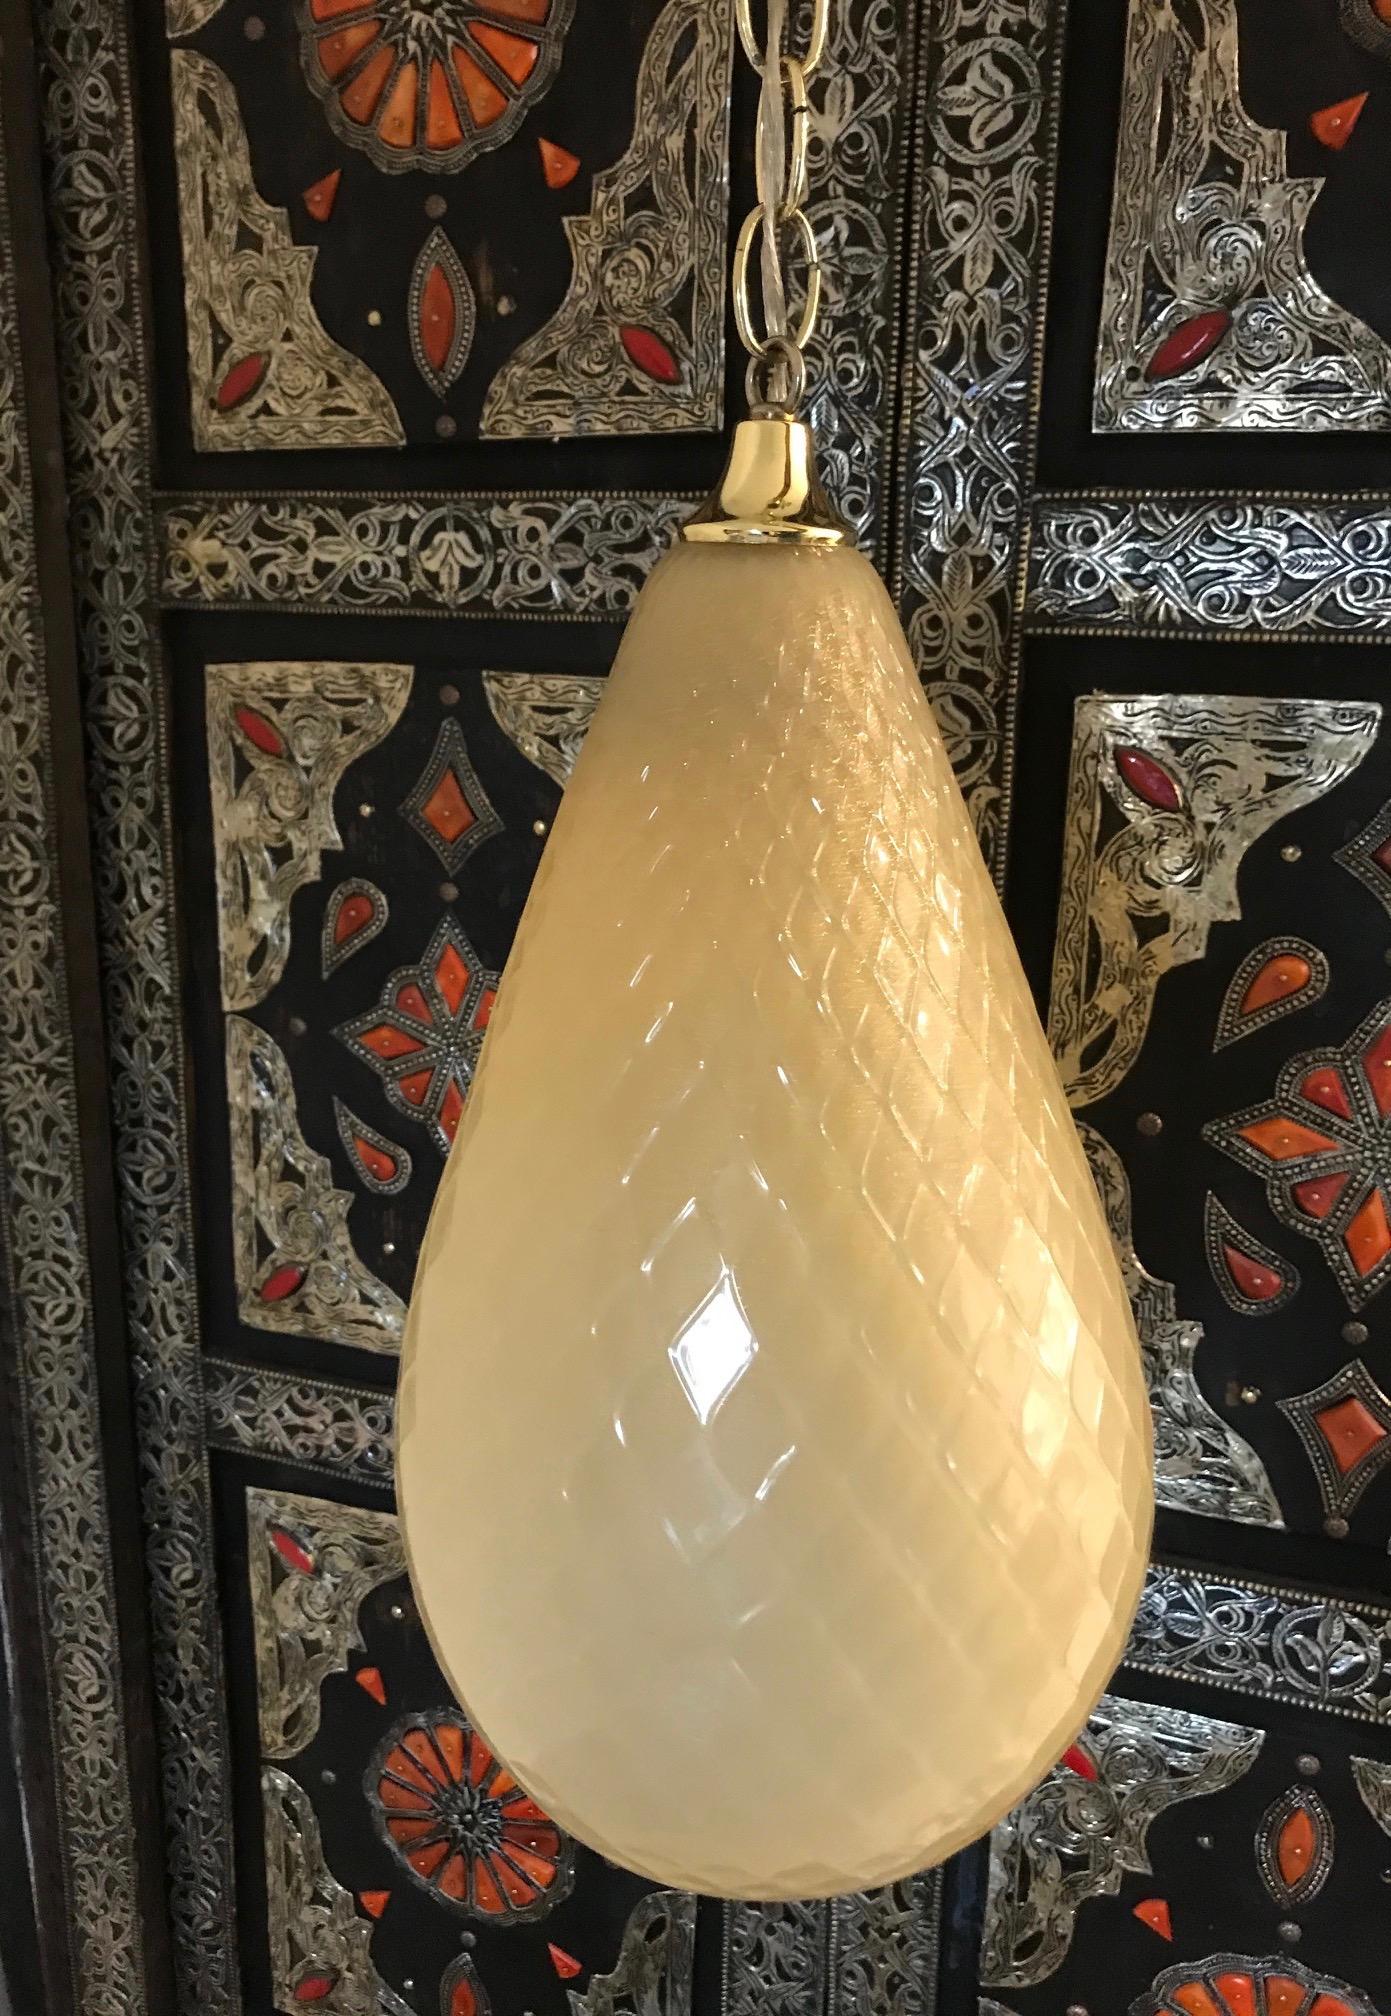 Mid-Century Modern hand blown Murano glass light fixture in a rich beige color with gold fleck accents. The pendant chandelier has a Moorish or Moroccan inspired design in the form of a tear drop or a bell with etched diamond patterns. Fitted with a